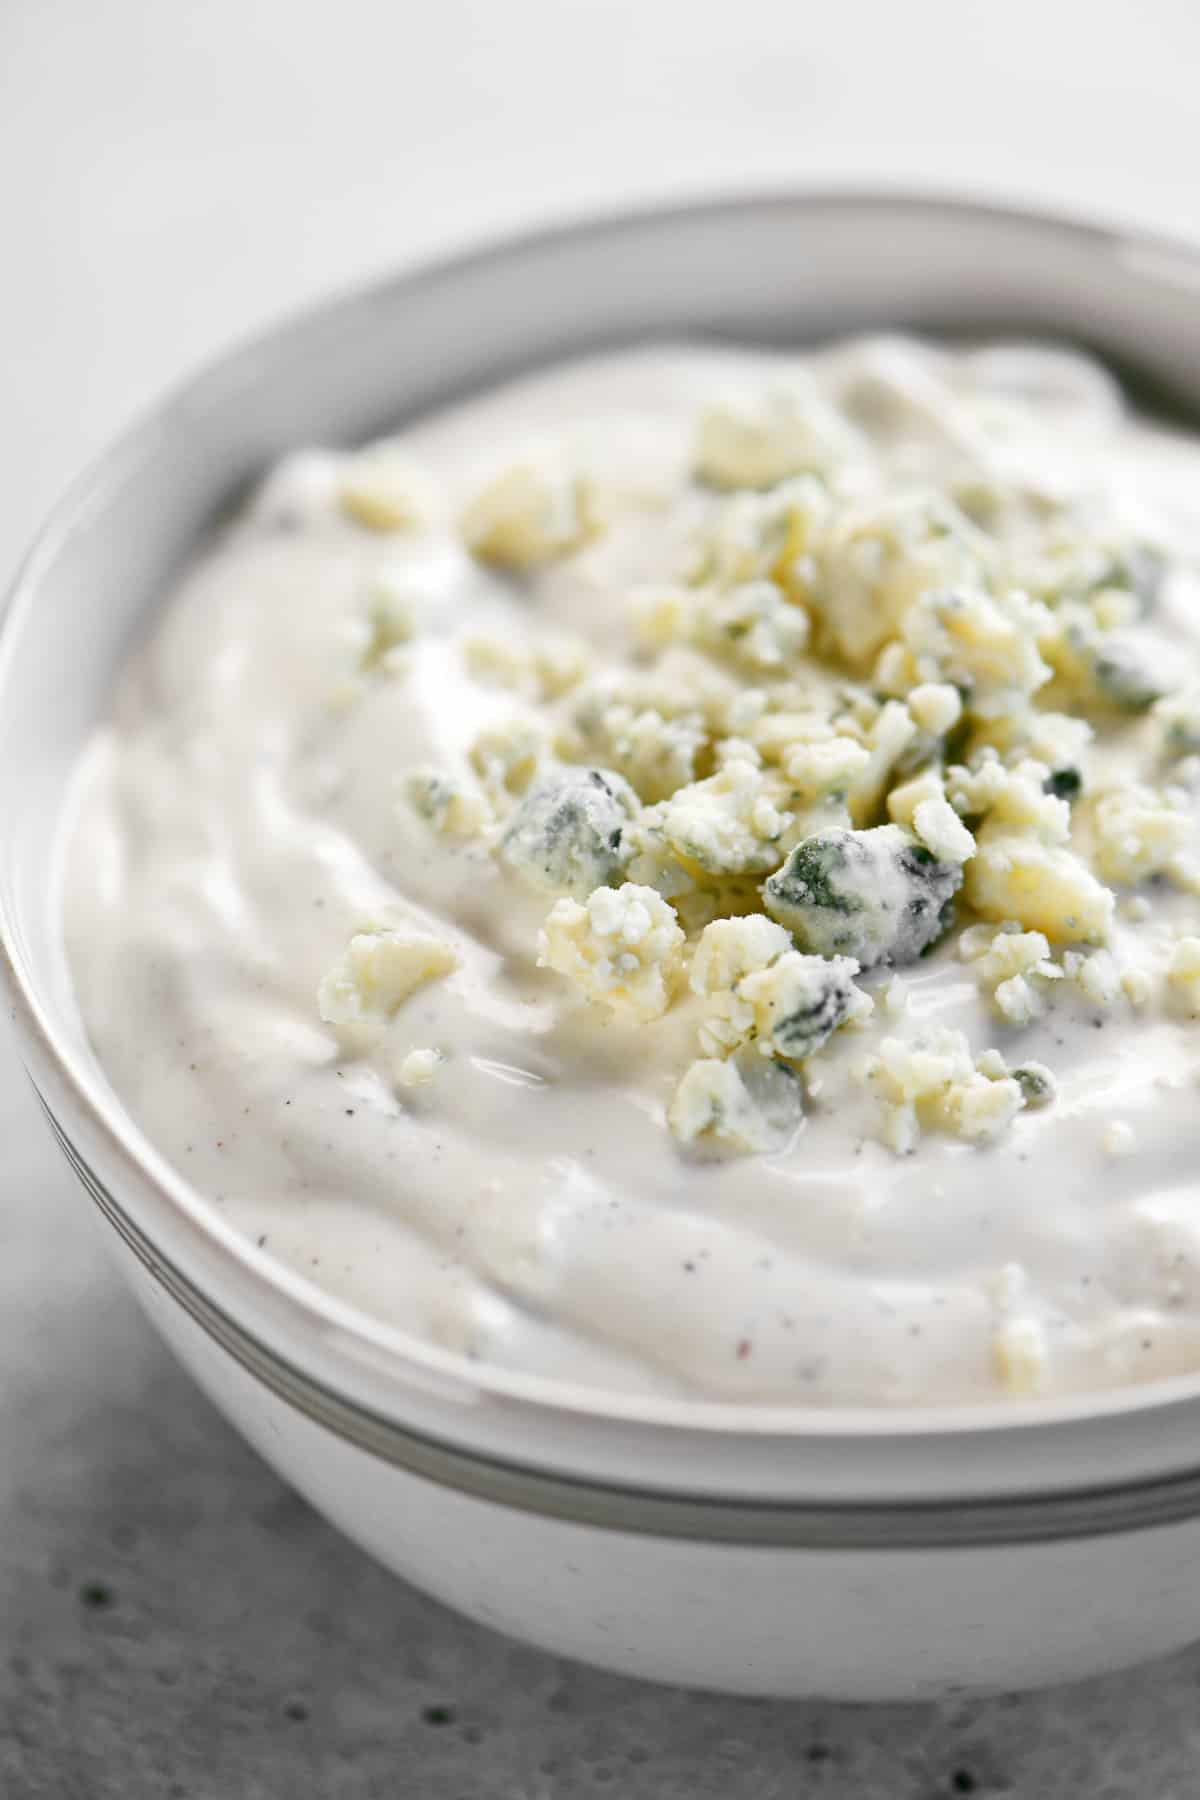 Blue Cheese dipping sauce in a white bowl.